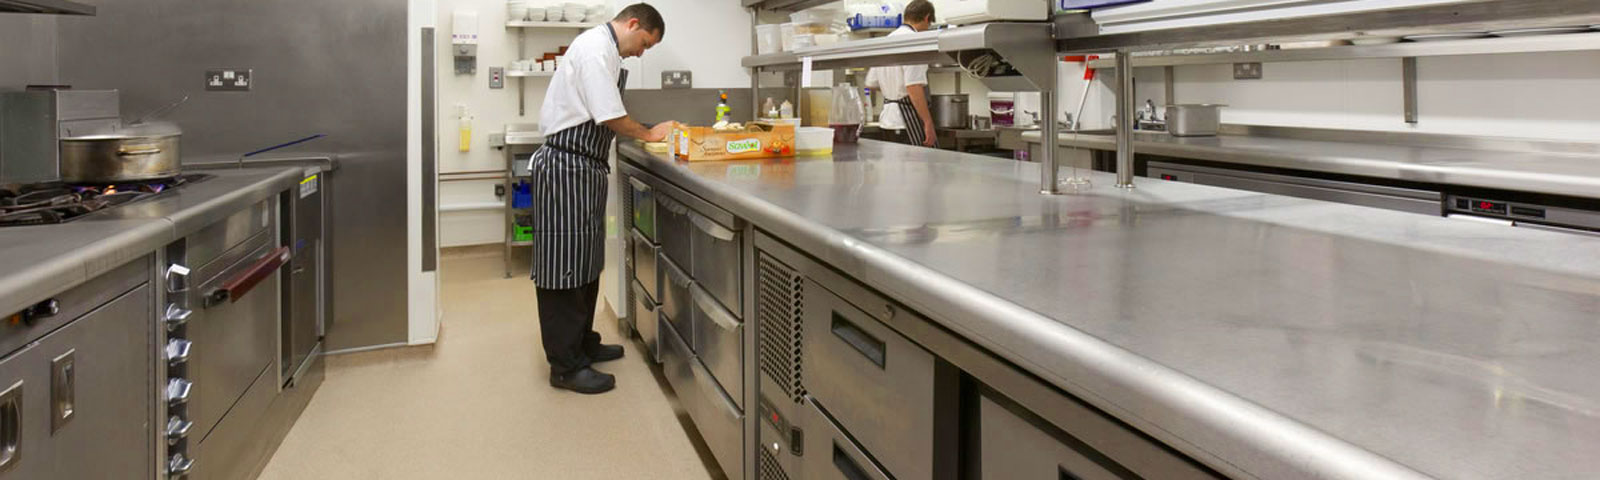 Commercial Food Preparation and Kitchen Flooring